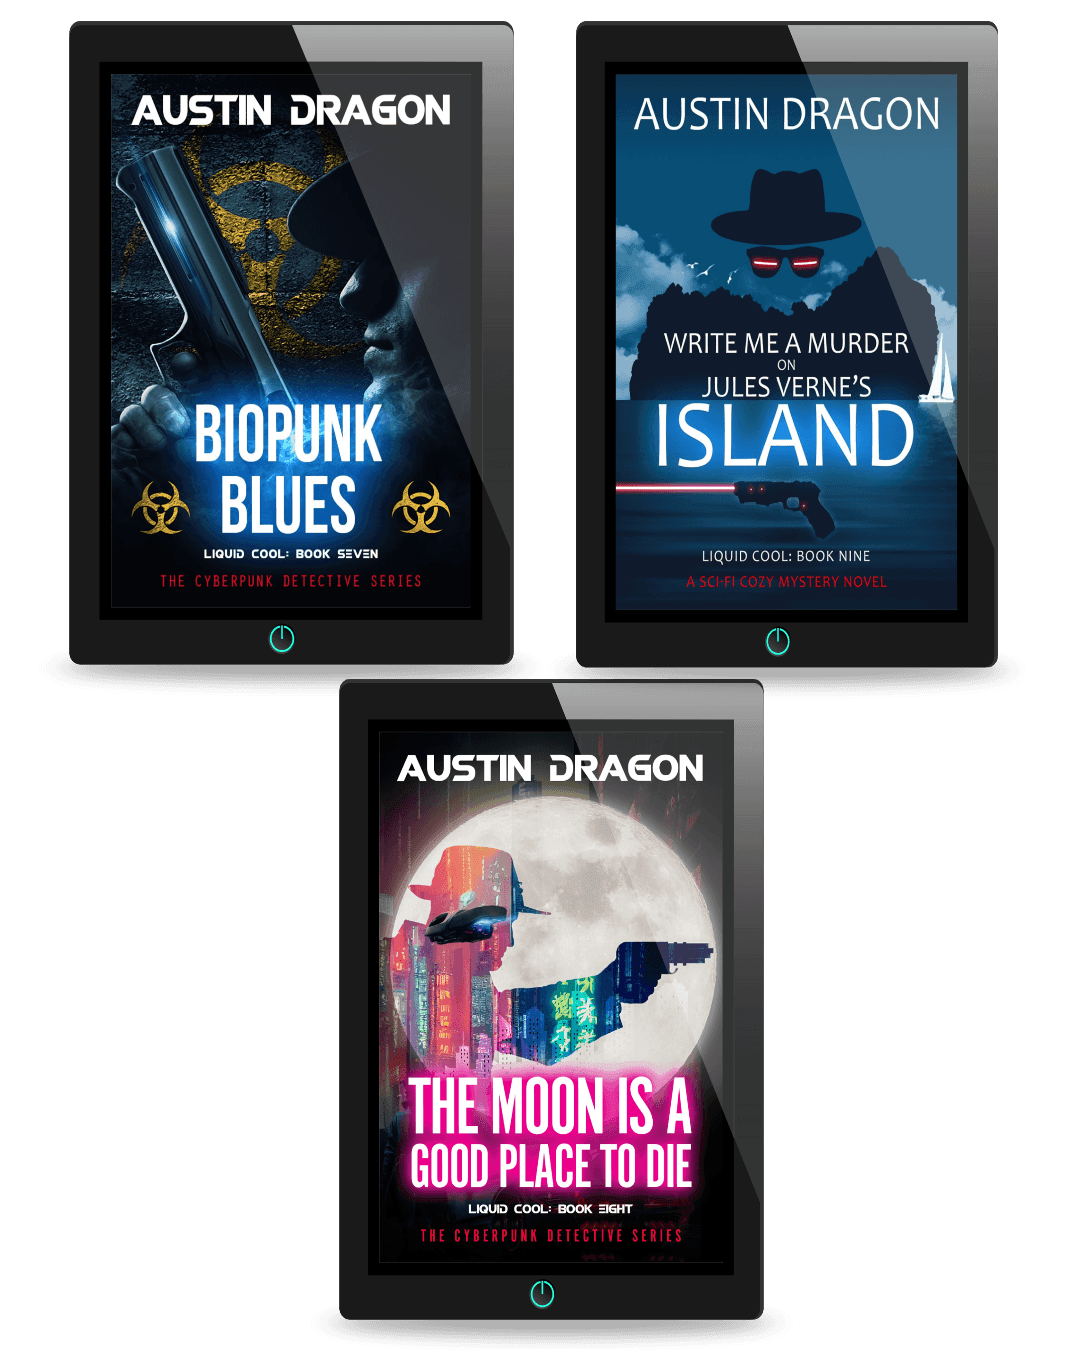 Liquid Cool Series Box Set 3: Biopunk Blues, The Moon is a Good Place to Die, Write Me a Murder on Jules Verne's Island (Ebooks)